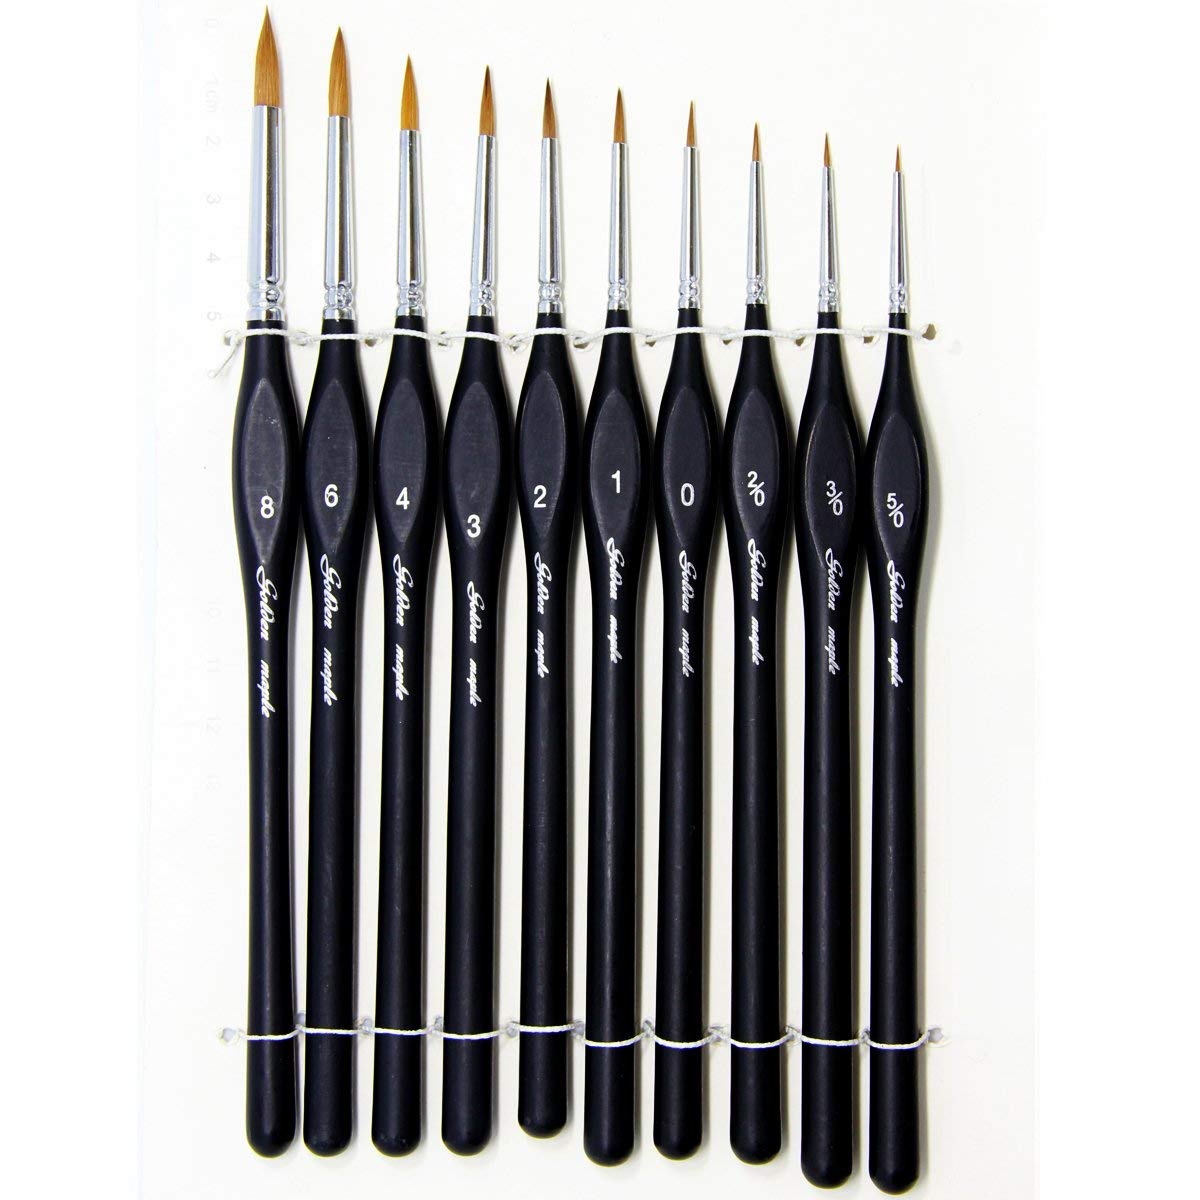  FUBAINA Detail Paint Brushes Set 12pcs Miniature Brushes for  Fine Detailing & Art Painting - Acrylic,Watercolor,Oil,Models,Face,Nails,  Line Drawing,Warhammer 40k, Brown (F911-12)